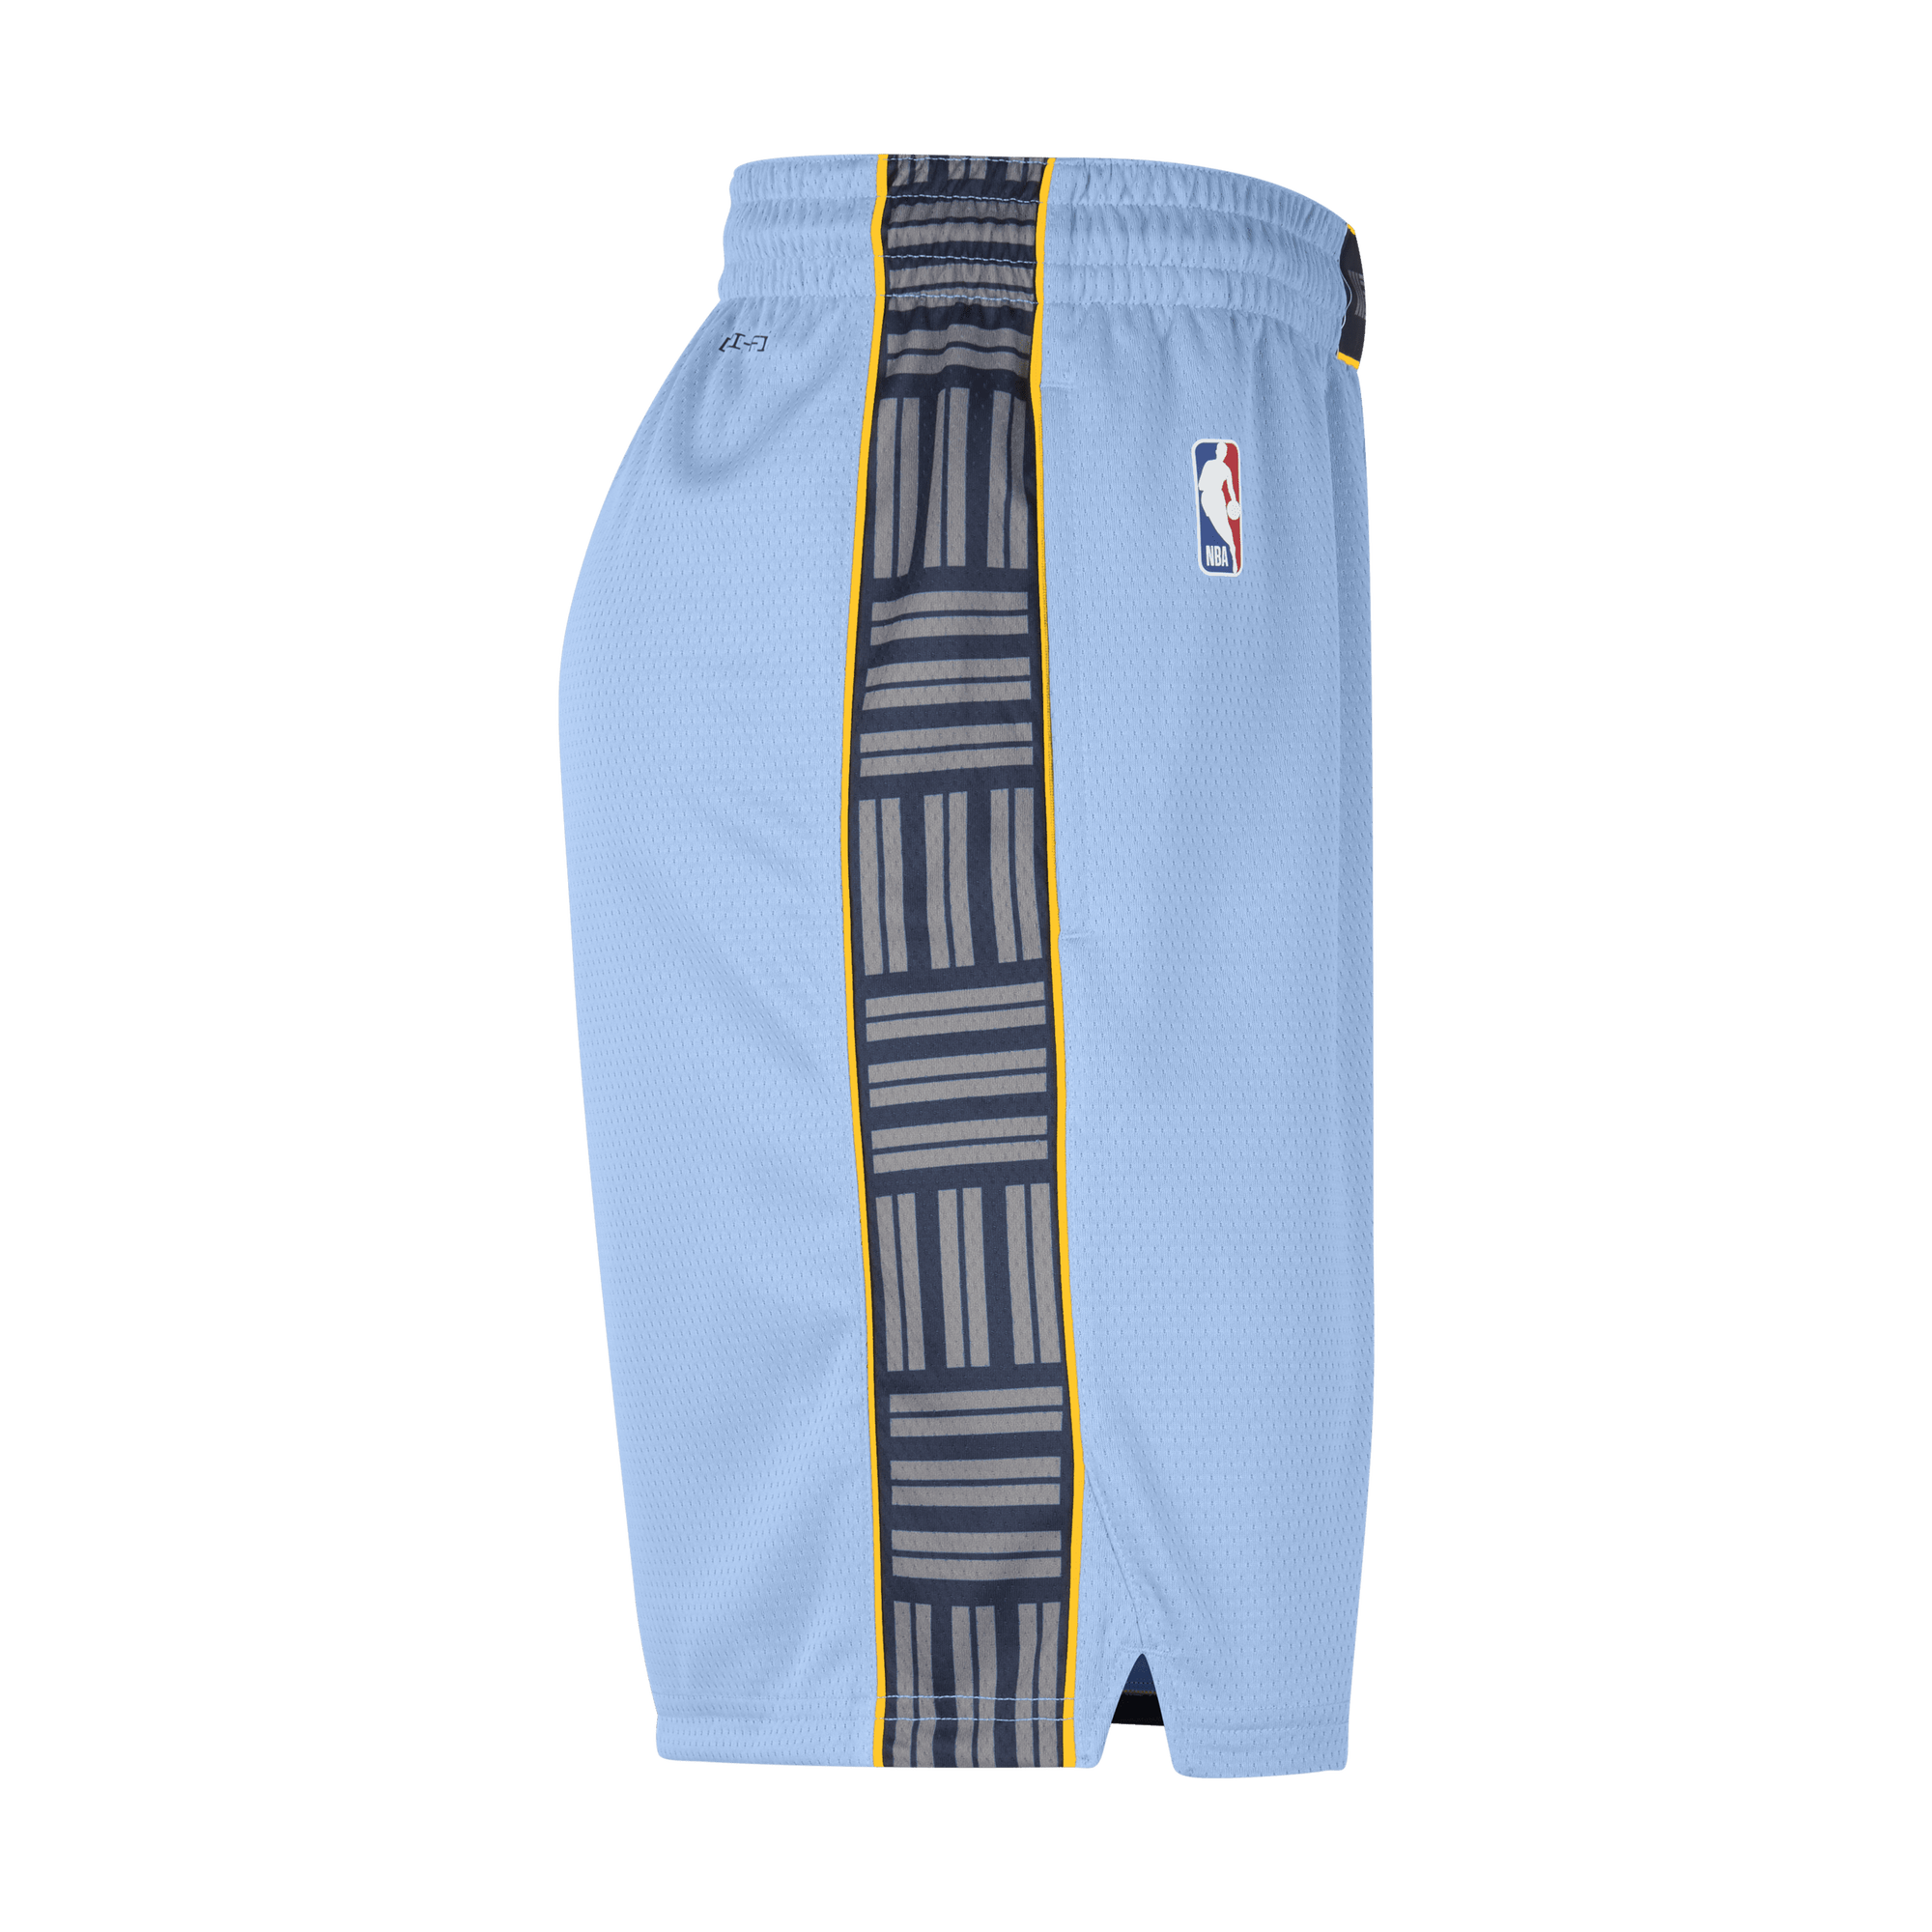 Grizzlies Shorts, City Edition